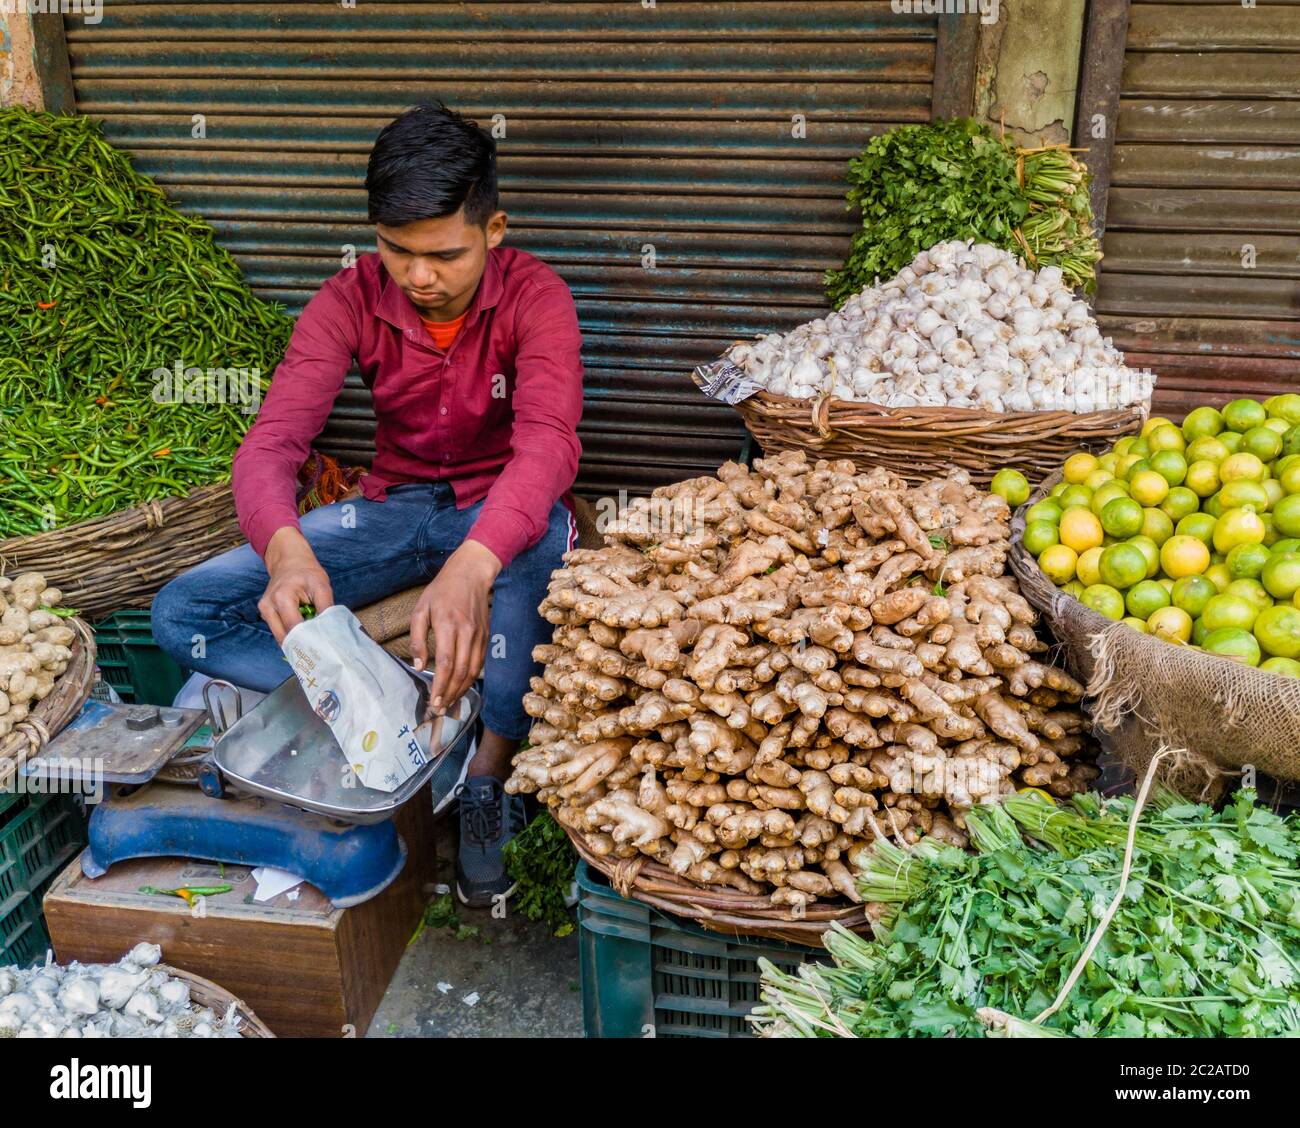 Editorial, Dated-20th March 2020, Location- dehradun uttarakhand India. A young Indian roadside vegetable vender. Stock Photo